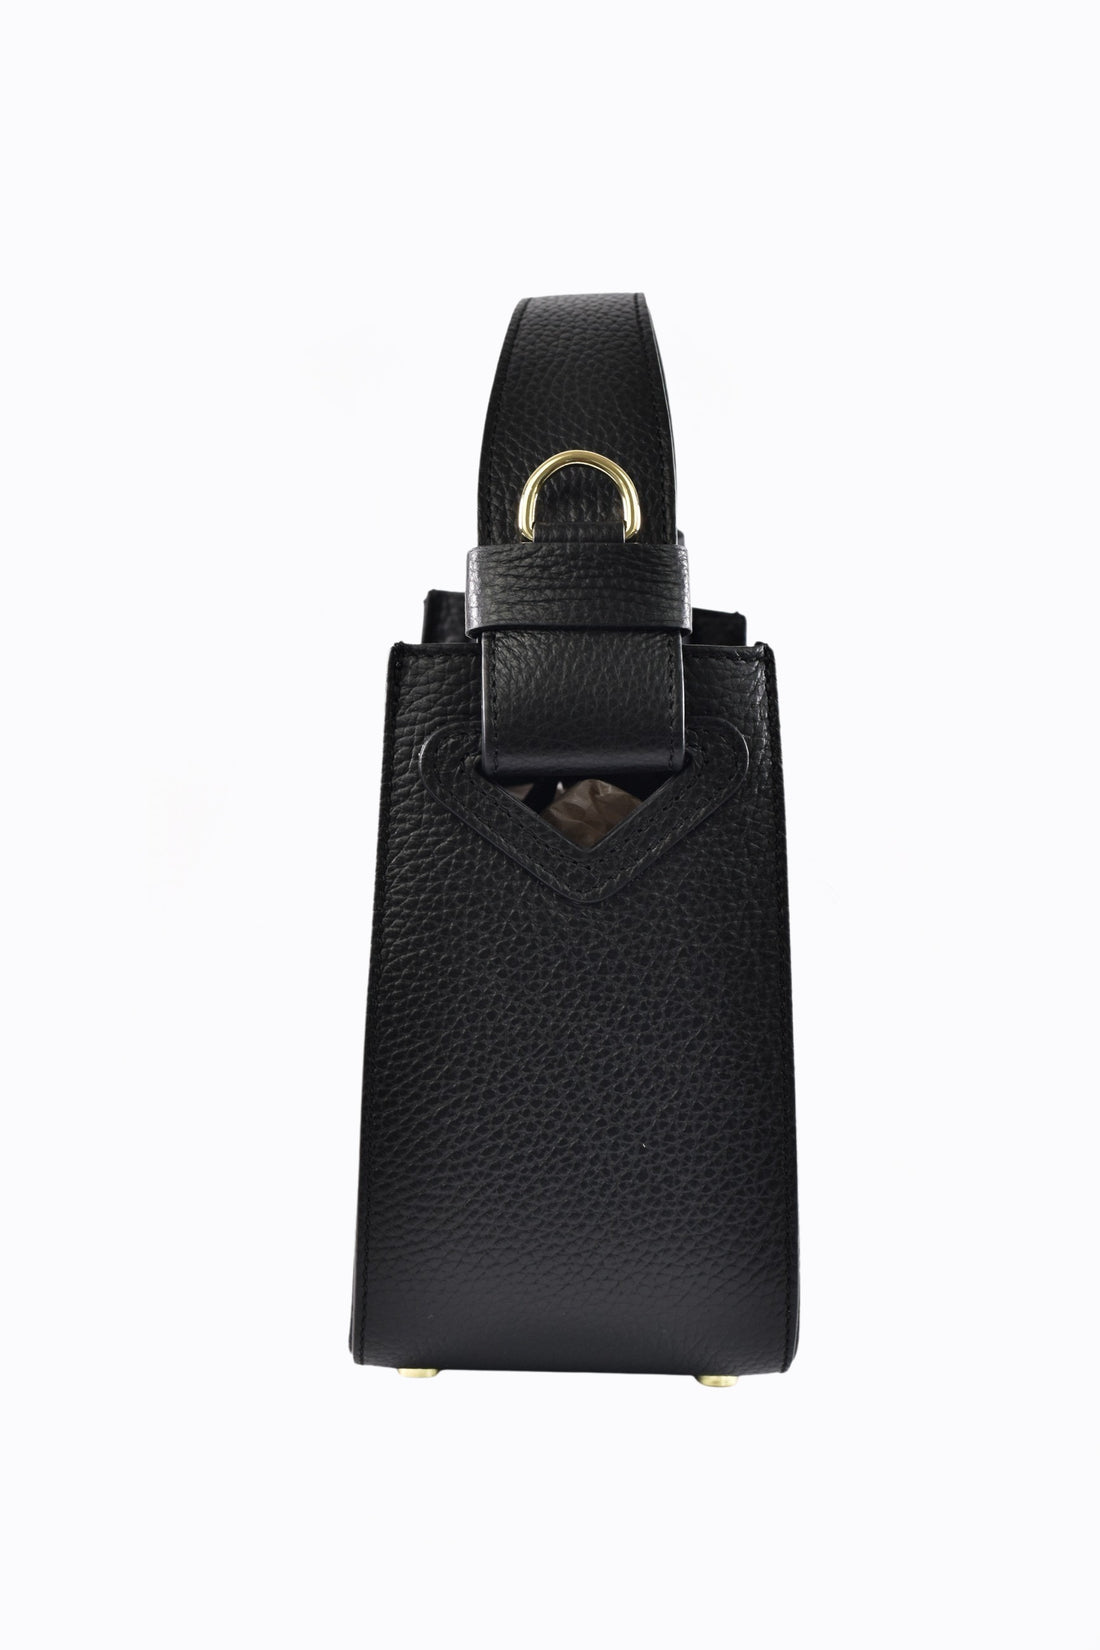 Kendall bag in black dollar leather